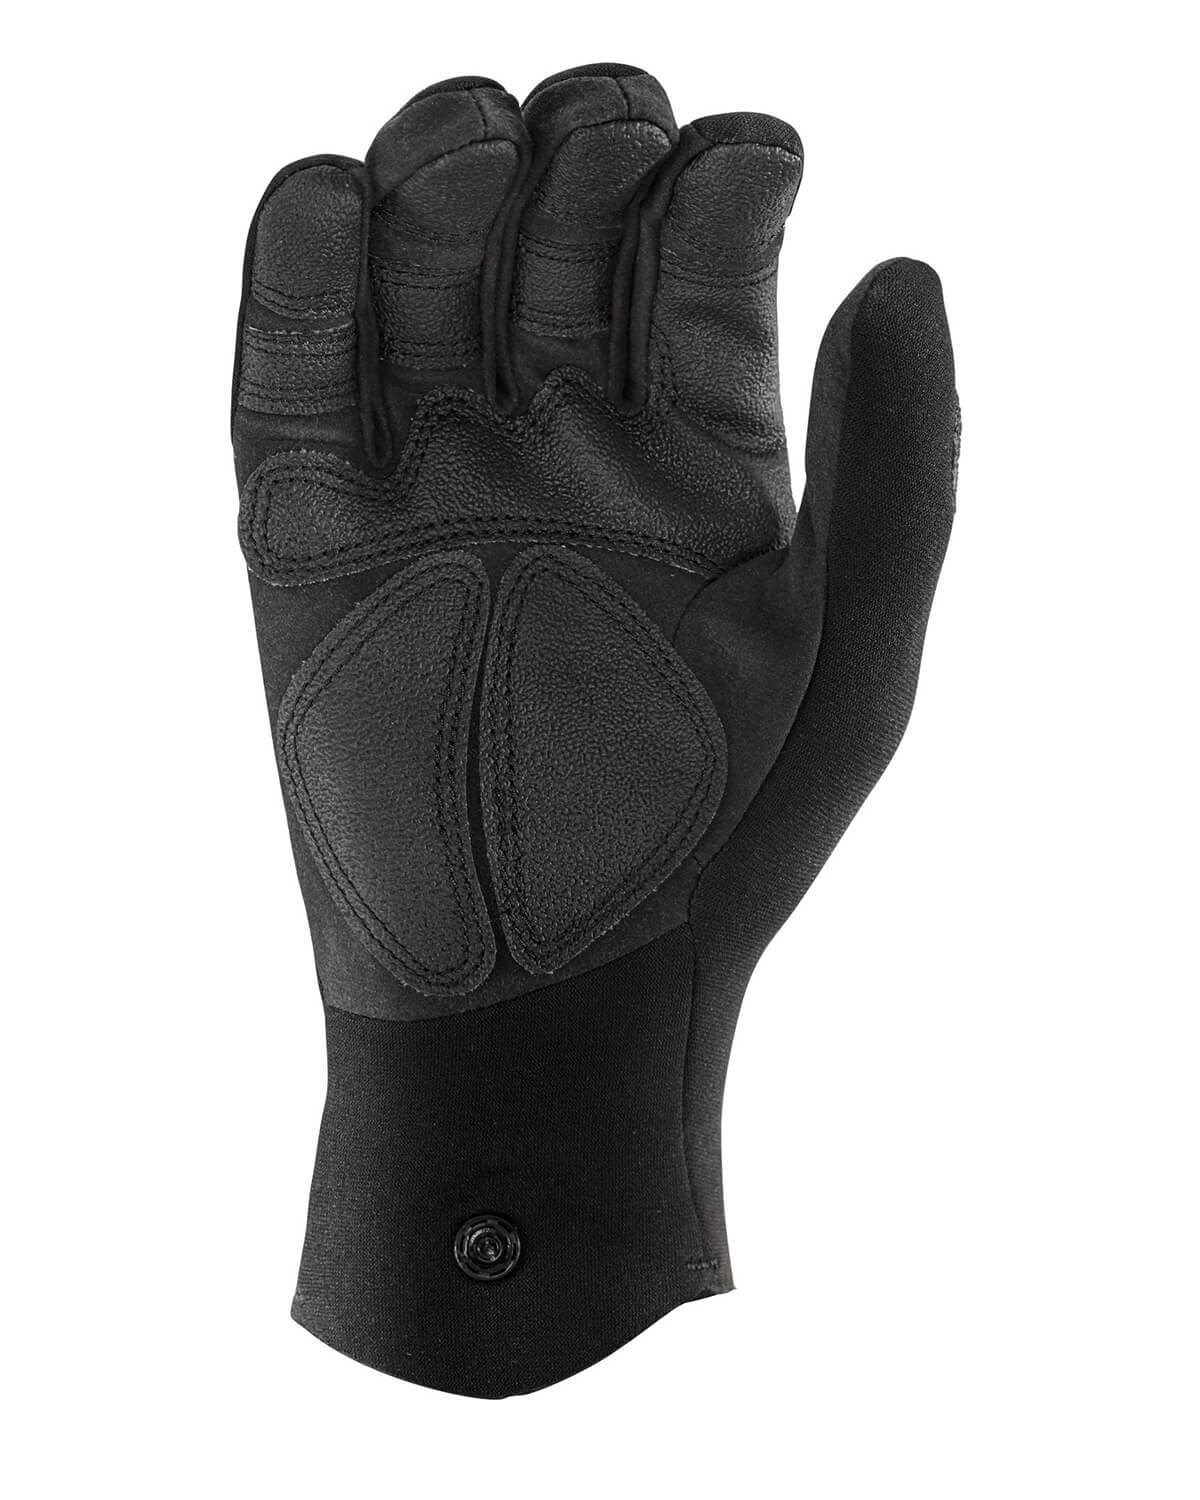 2mm NRS Utility Gloves